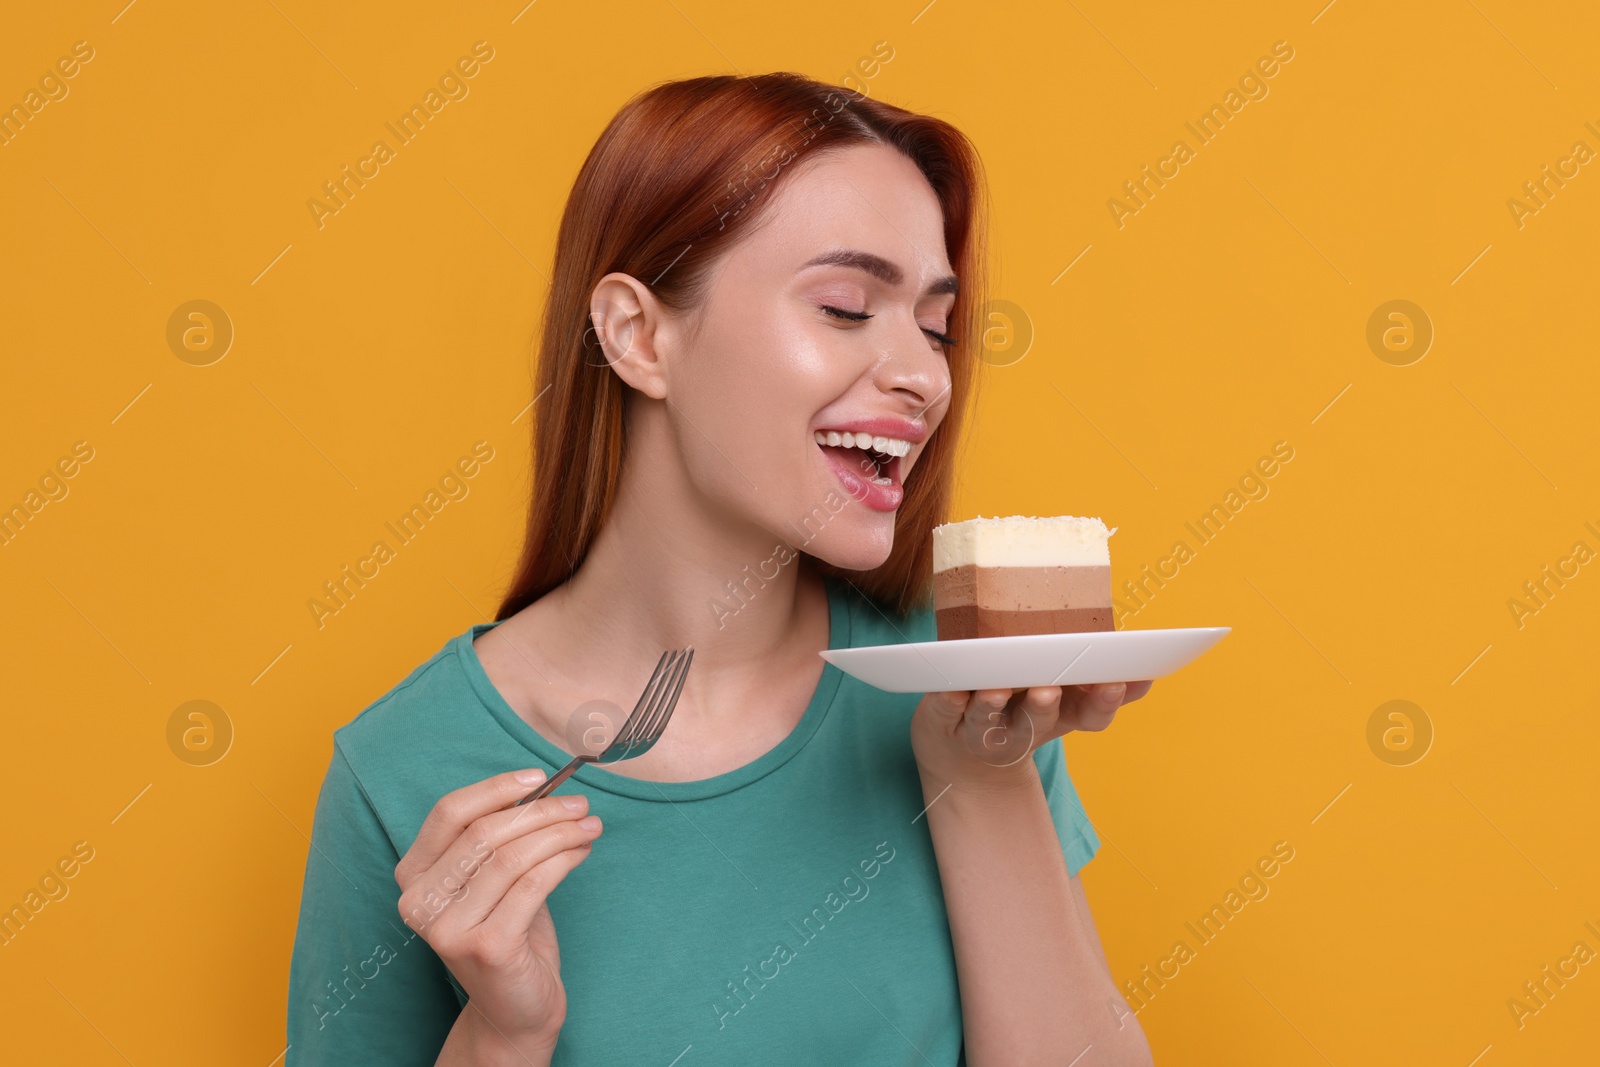 Photo of Young woman eating piece of tasty cake on orange background